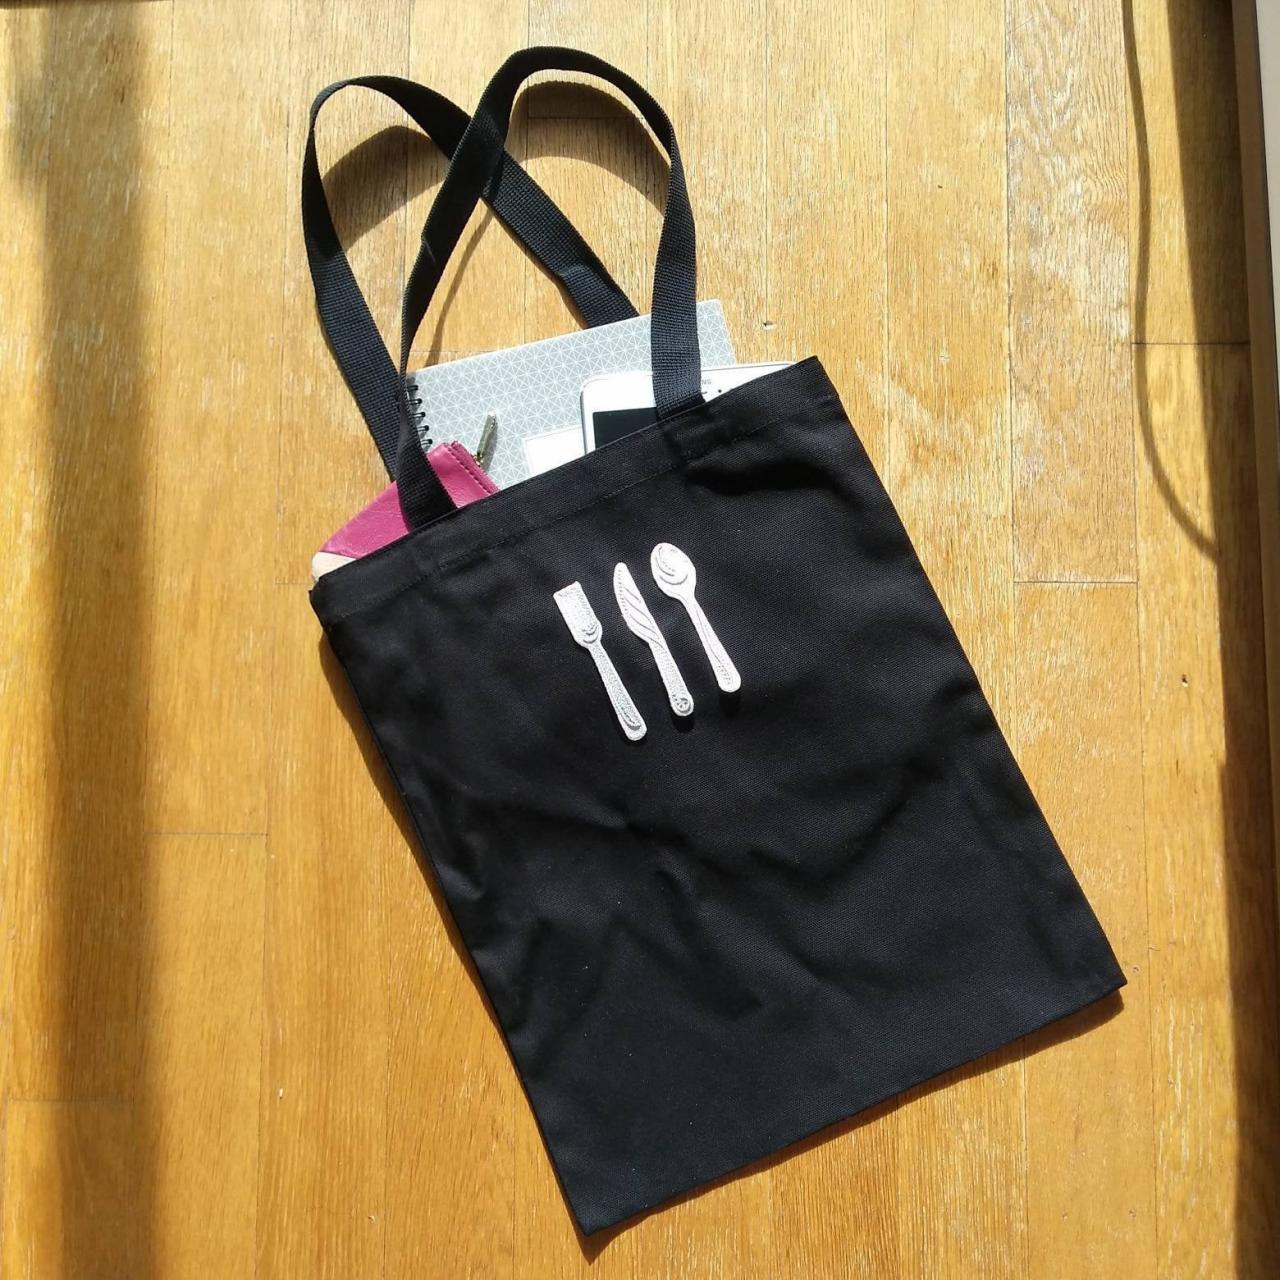 Fork Knife Spoon Cutlery Cotton Eco Tote Bag, Canvas Tote Bag, Book Bag ( Black/ White)